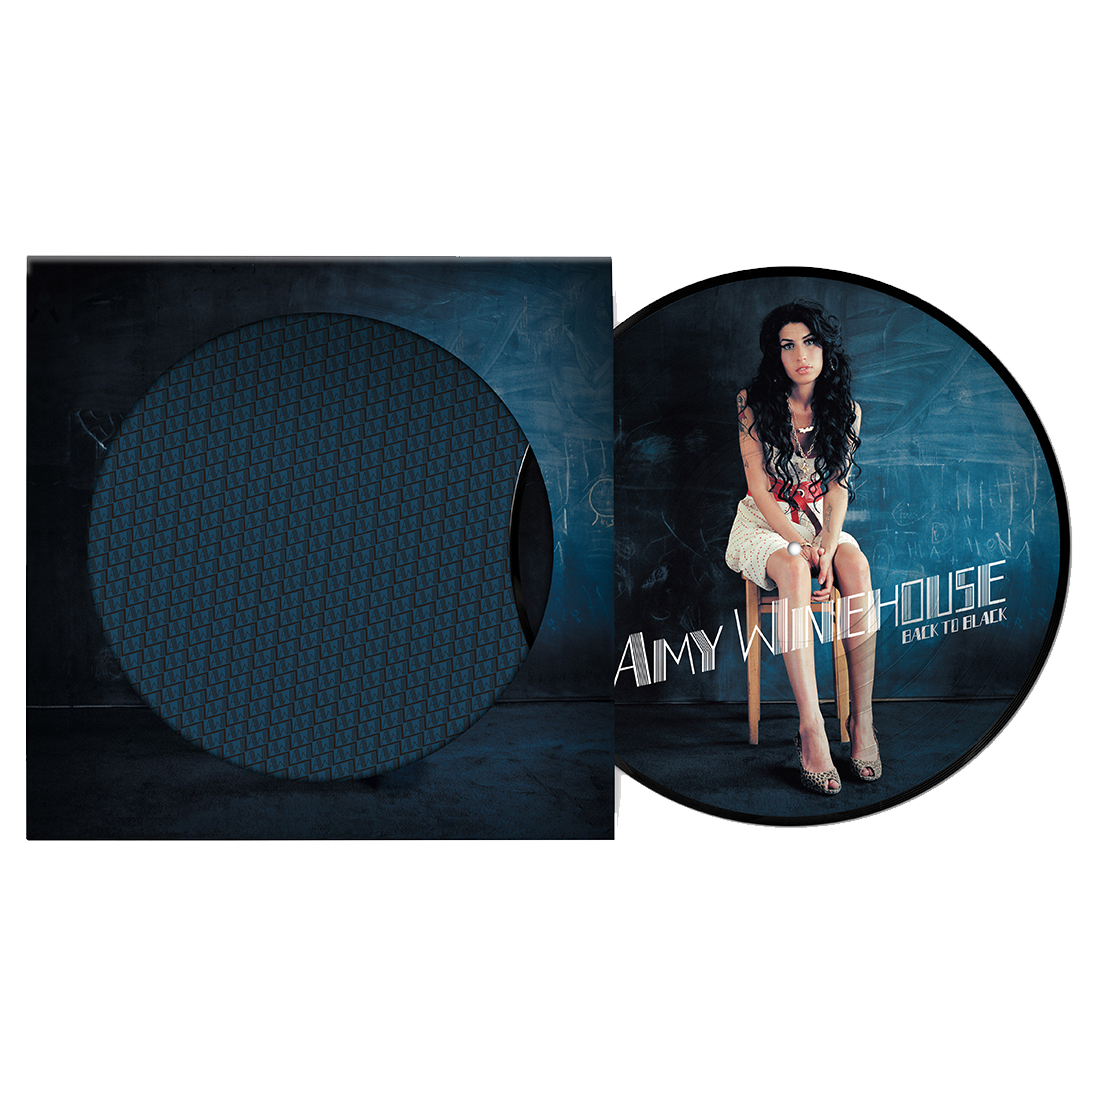 Amy Winehouse "Back To Black" Picture Disc LP